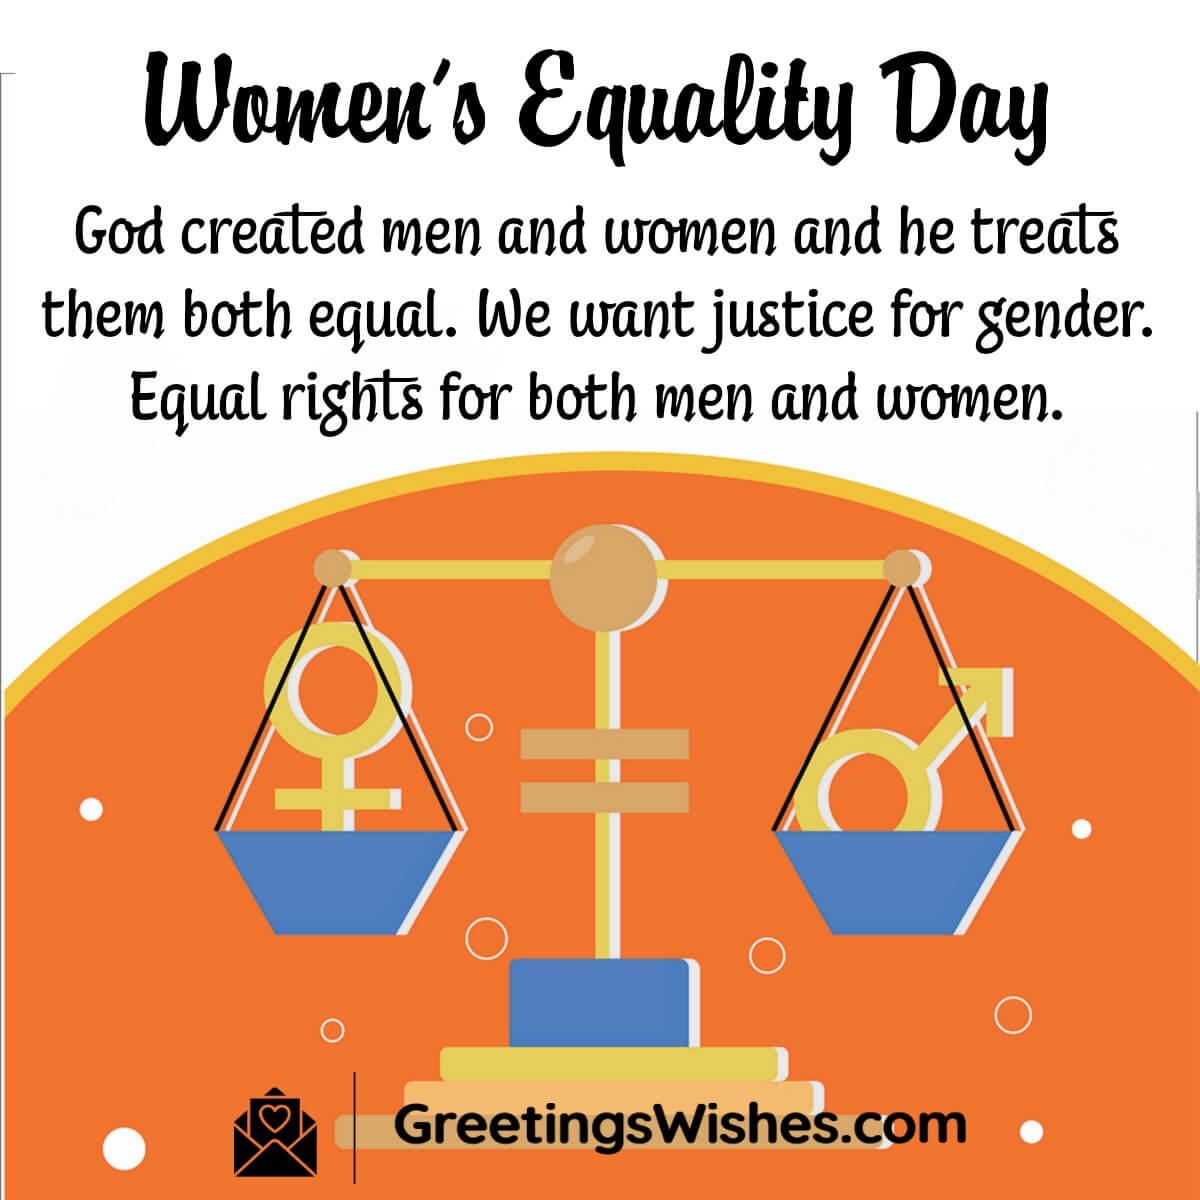 Women's Equality Day Wish